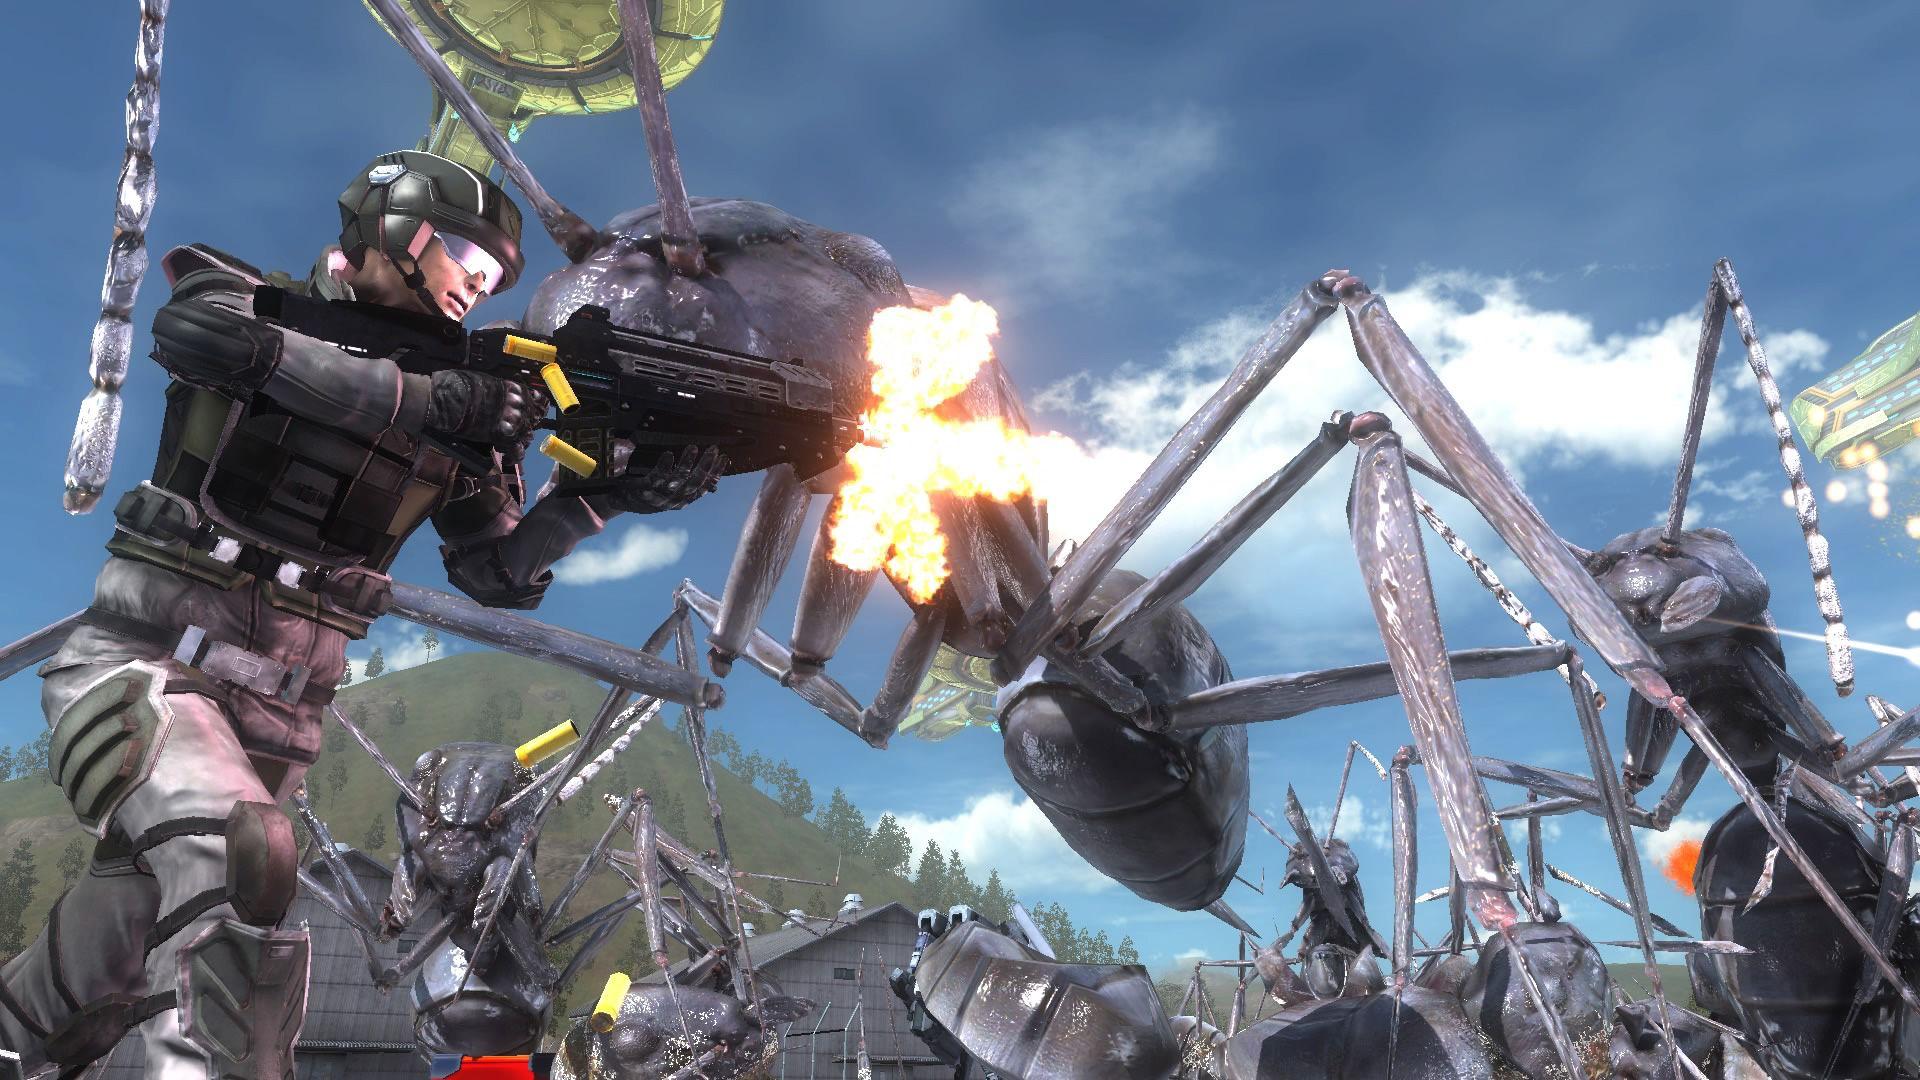 Review: Earth Defense Force 5 Is B Grade Gaming At Its Finest